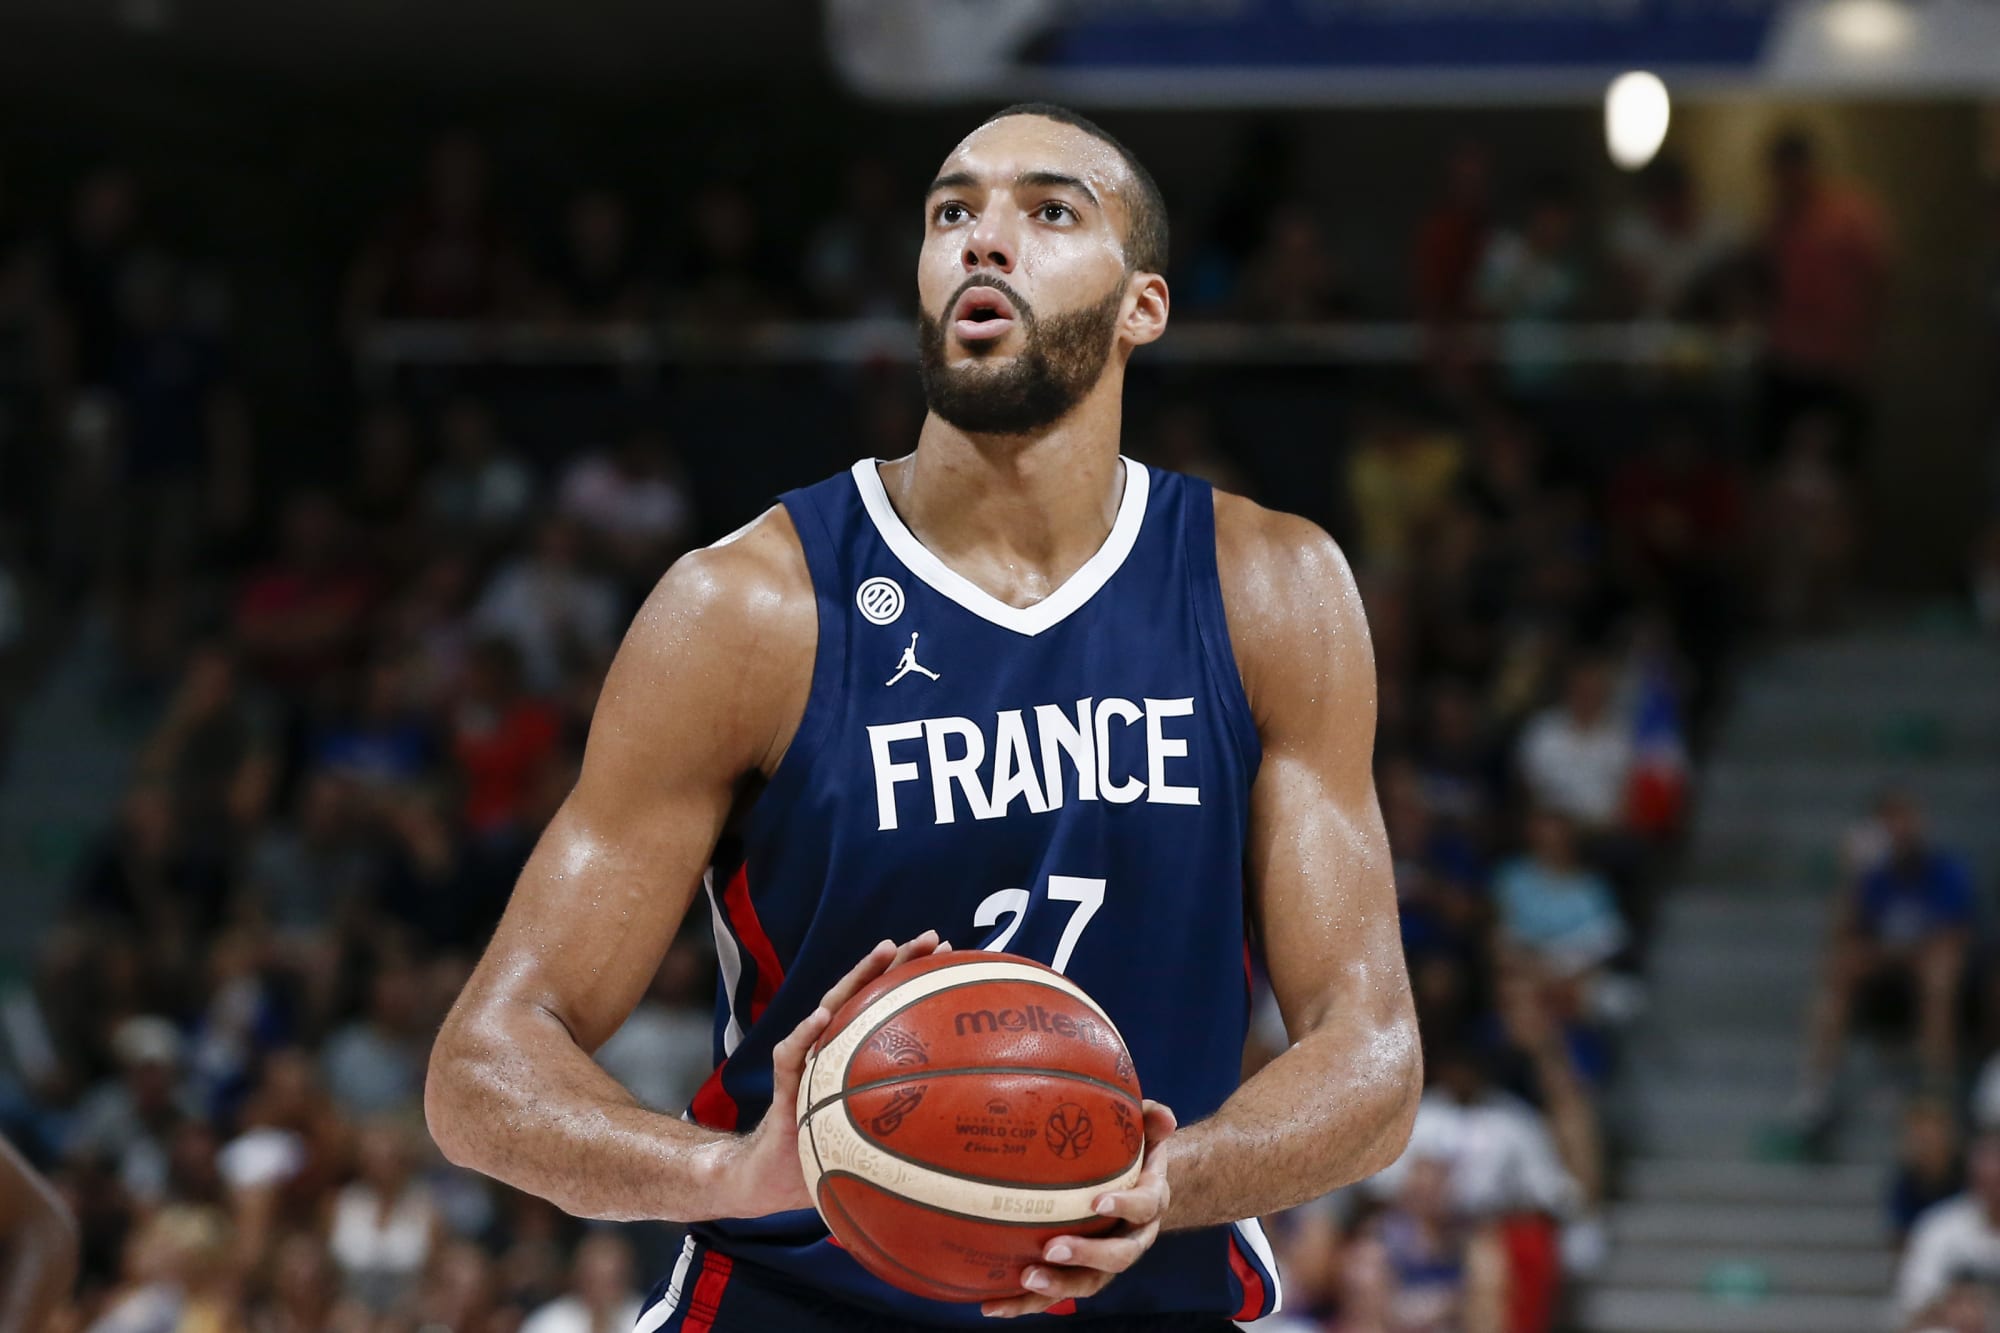 Rudy Gobert's FIBA performance should be a thrill for Utah Jazz fans